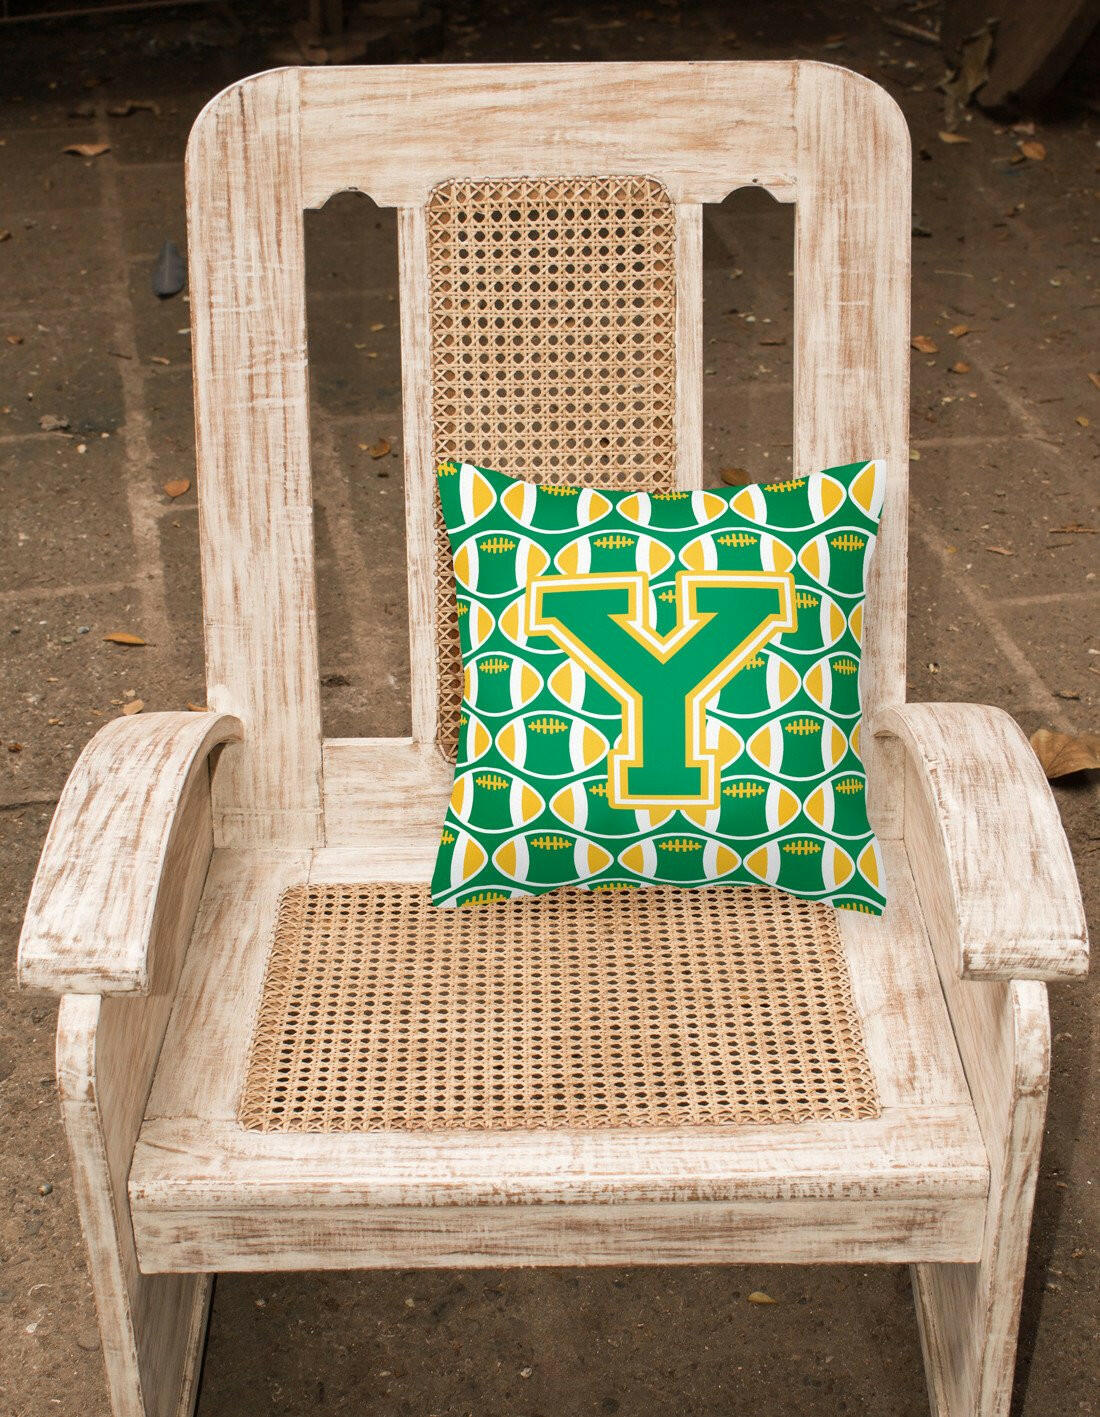 Letter Y Football Green and Gold Fabric Decorative Pillow CJ1069-YPW1414 by Caroline's Treasures